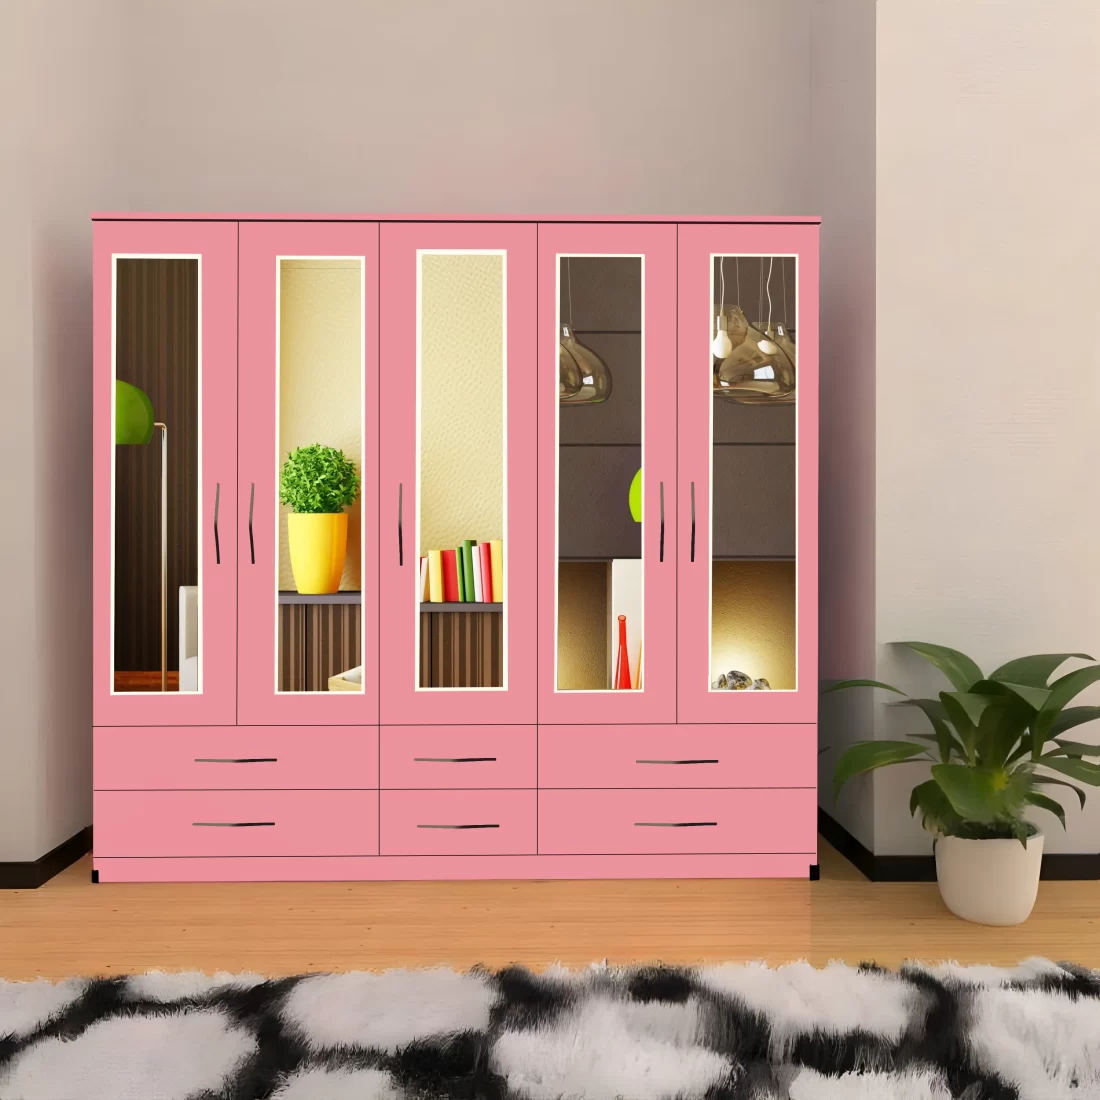 5 DOOR WARDROBE WITH 5 MIRRORS & 6 DRAWERS In PInk Colour